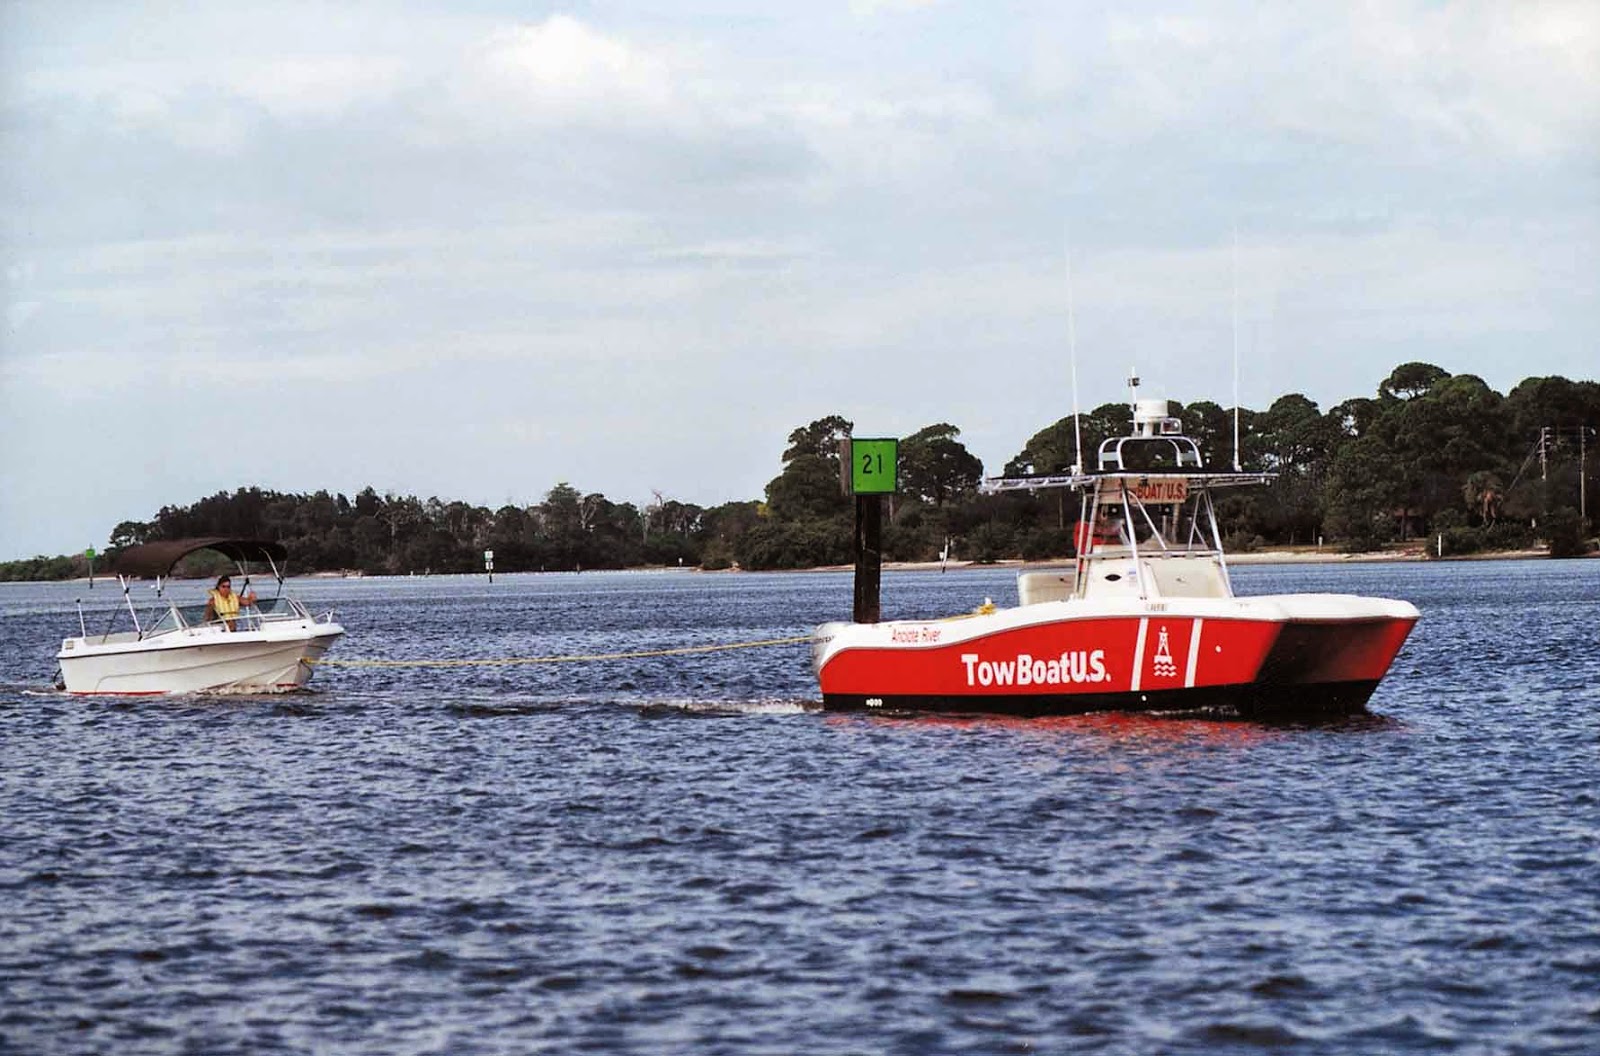 Tow Boat US and/or Sea Tow Memberships... Don't Leave Port Without Them!!